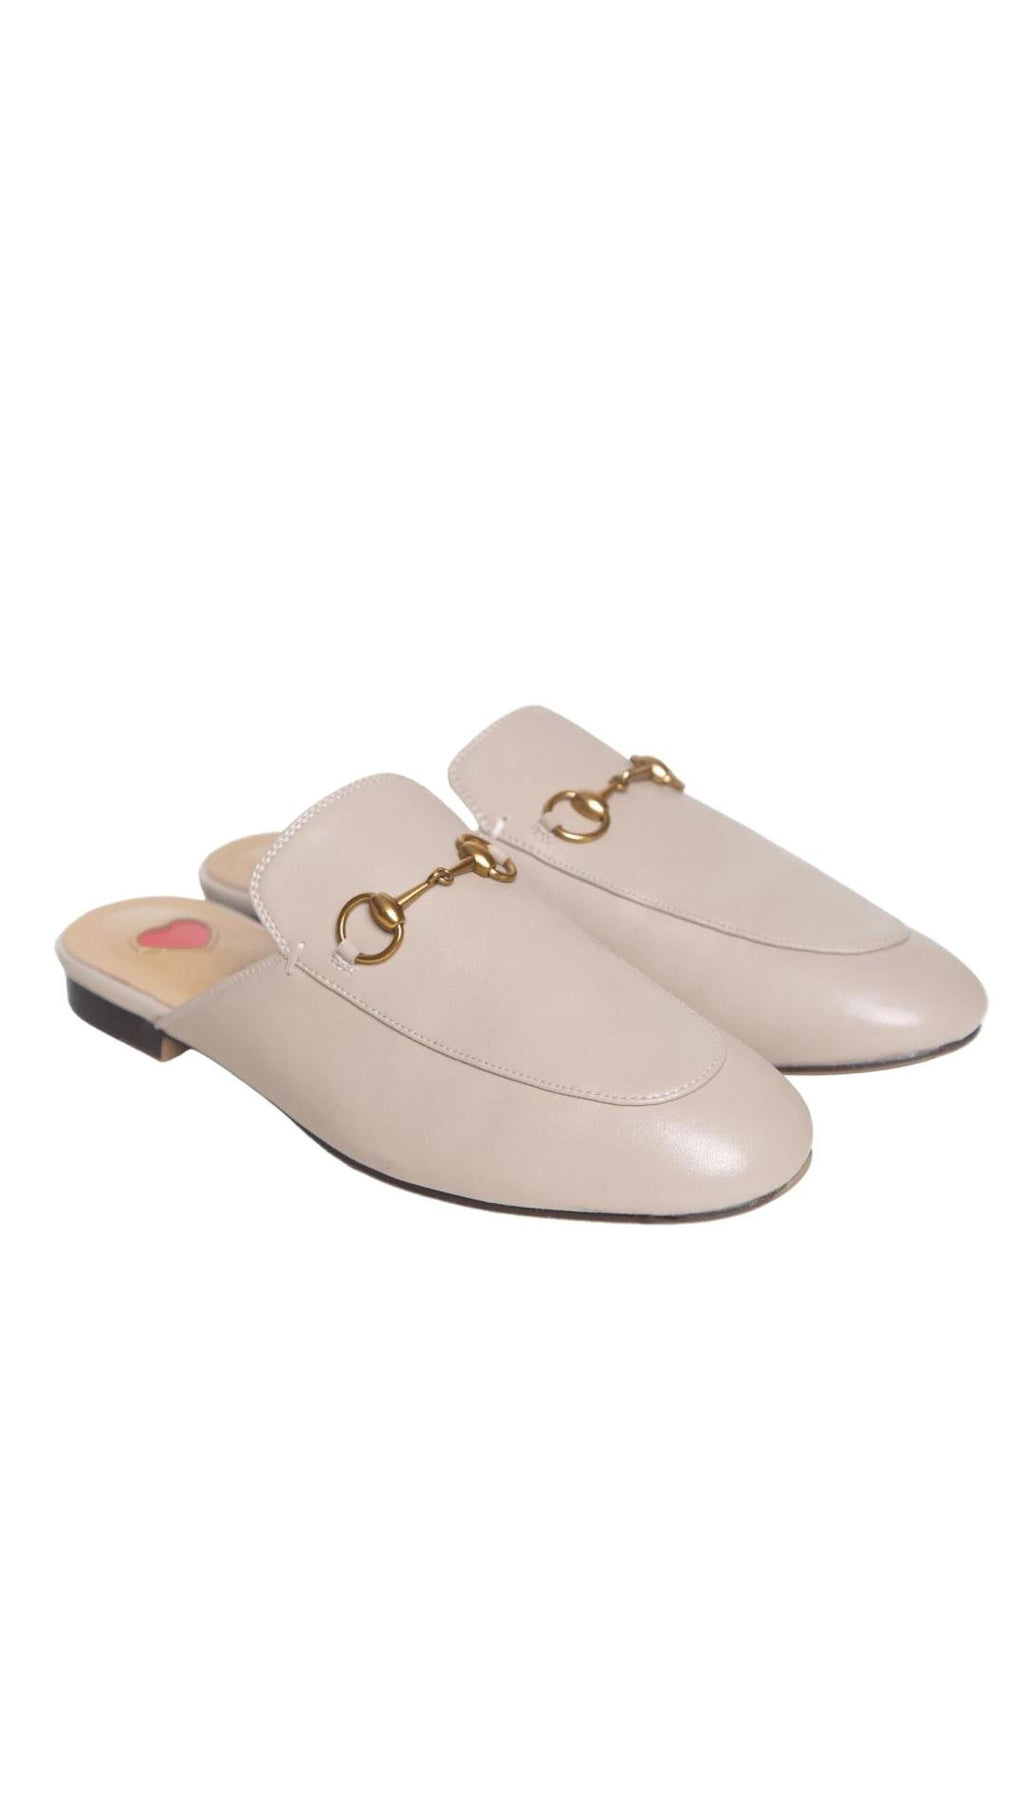 THE LEATHER SLIDER IN PERFECT NUDE Shoes & Slippers Privè - Slider 